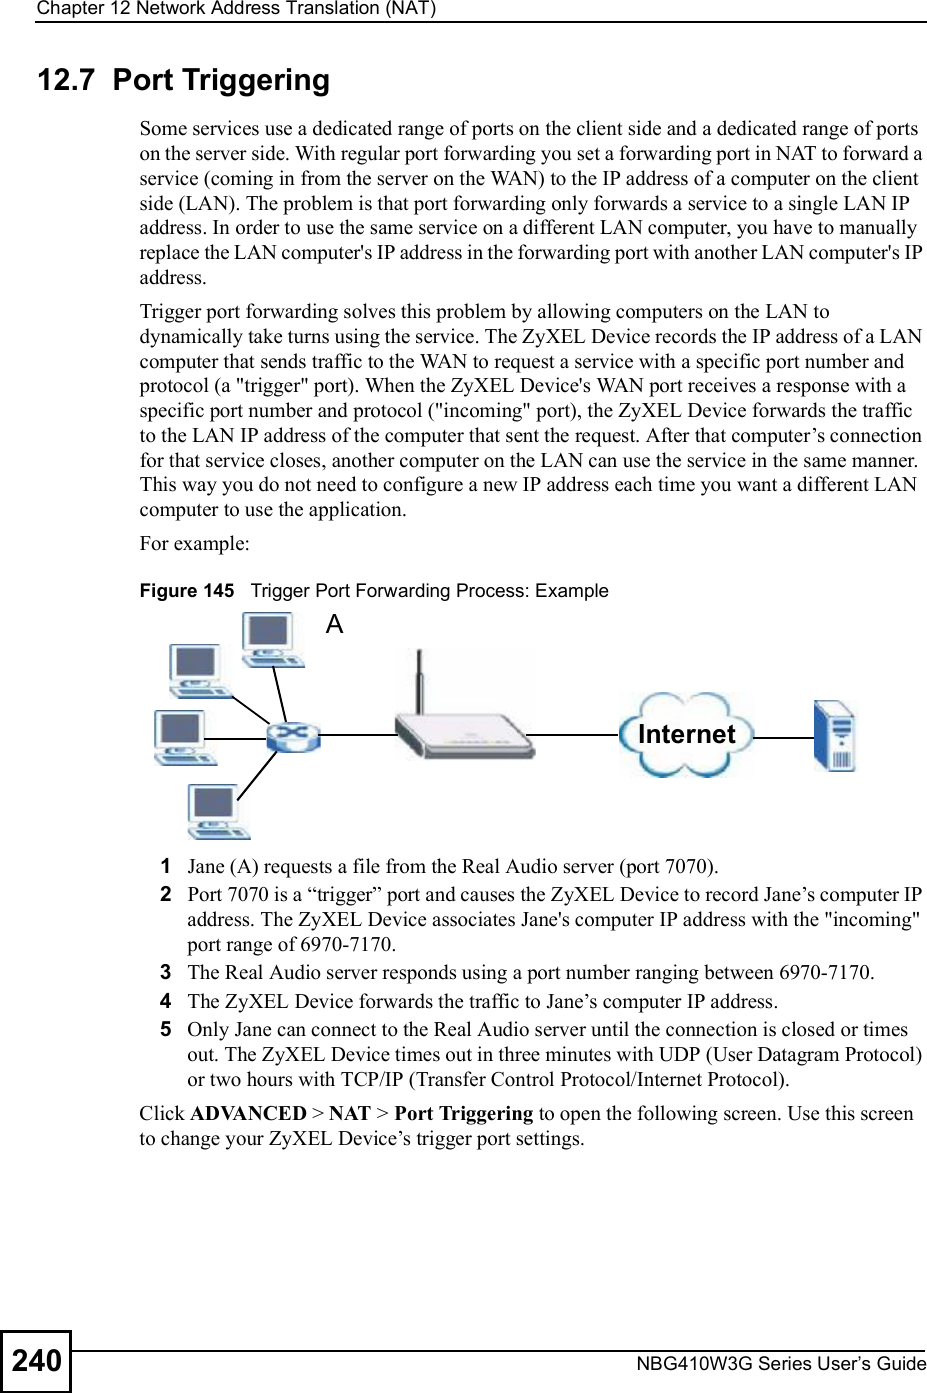 Chapter 12Network Address Translation (NAT)NBG410W3G Series User s Guide24012.7  Port Triggering   Some services use a dedicated range of ports on the client side and a dedicated range of ports on the server side. With regular port forwarding you set a forwarding port in NAT to forward a service (coming in from the server on the WAN) to the IP address of a computer on the client side (LAN). The problem is that port forwarding only forwards a service to a single LAN IP address. In order to use the same service on a different LAN computer, you have to manually replace the LAN computer&apos;s IP address in the forwarding port with another LAN computer&apos;s IP address. Trigger port forwarding solves this problem by allowing computers on the LAN to dynamically take turns using the service. The ZyXEL Device records the IP address of a LAN computer that sends traffic to the WAN to request a service with a specific port number and protocol (a &quot;trigger&quot; port). When the ZyXEL Device&apos;s WAN port receives a response with a specific port number and protocol (&quot;incoming&quot; port), the ZyXEL Device forwards the traffic to the LAN IP address of the computer that sent the request. After that computer!s connection for that service closes, another computer on the LAN can use the service in the same manner. This way you do not need to configure a new IP address each time you want a different LAN computer to use the application.For example:Figure 145   Trigger Port Forwarding Process: Example1Jane (A) requests a file from the Real Audio server (port 7070).2Port 7070 is a &quot;trigger# port and causes the ZyXEL Device to record Jane!s computer IP address. The ZyXEL Device associates Jane&apos;s computer IP address with the &quot;incoming&quot; port range of 6970-7170.3The Real Audio server responds using a port number ranging between 6970-7170.4The ZyXEL Device forwards the traffic to Jane!s computer IP address. 5Only Jane can connect to the Real Audio server until the connection is closed or times out. The ZyXEL Device times out in three minutes with UDP (User Datagram Protocol) or two hours with TCP/IP (Transfer Control Protocol/Internet Protocol). Click ADVANCED &gt; NAT &gt; Port Triggering to open the following screen. Use this screen to change your ZyXEL Device!s trigger port settings.InternetA